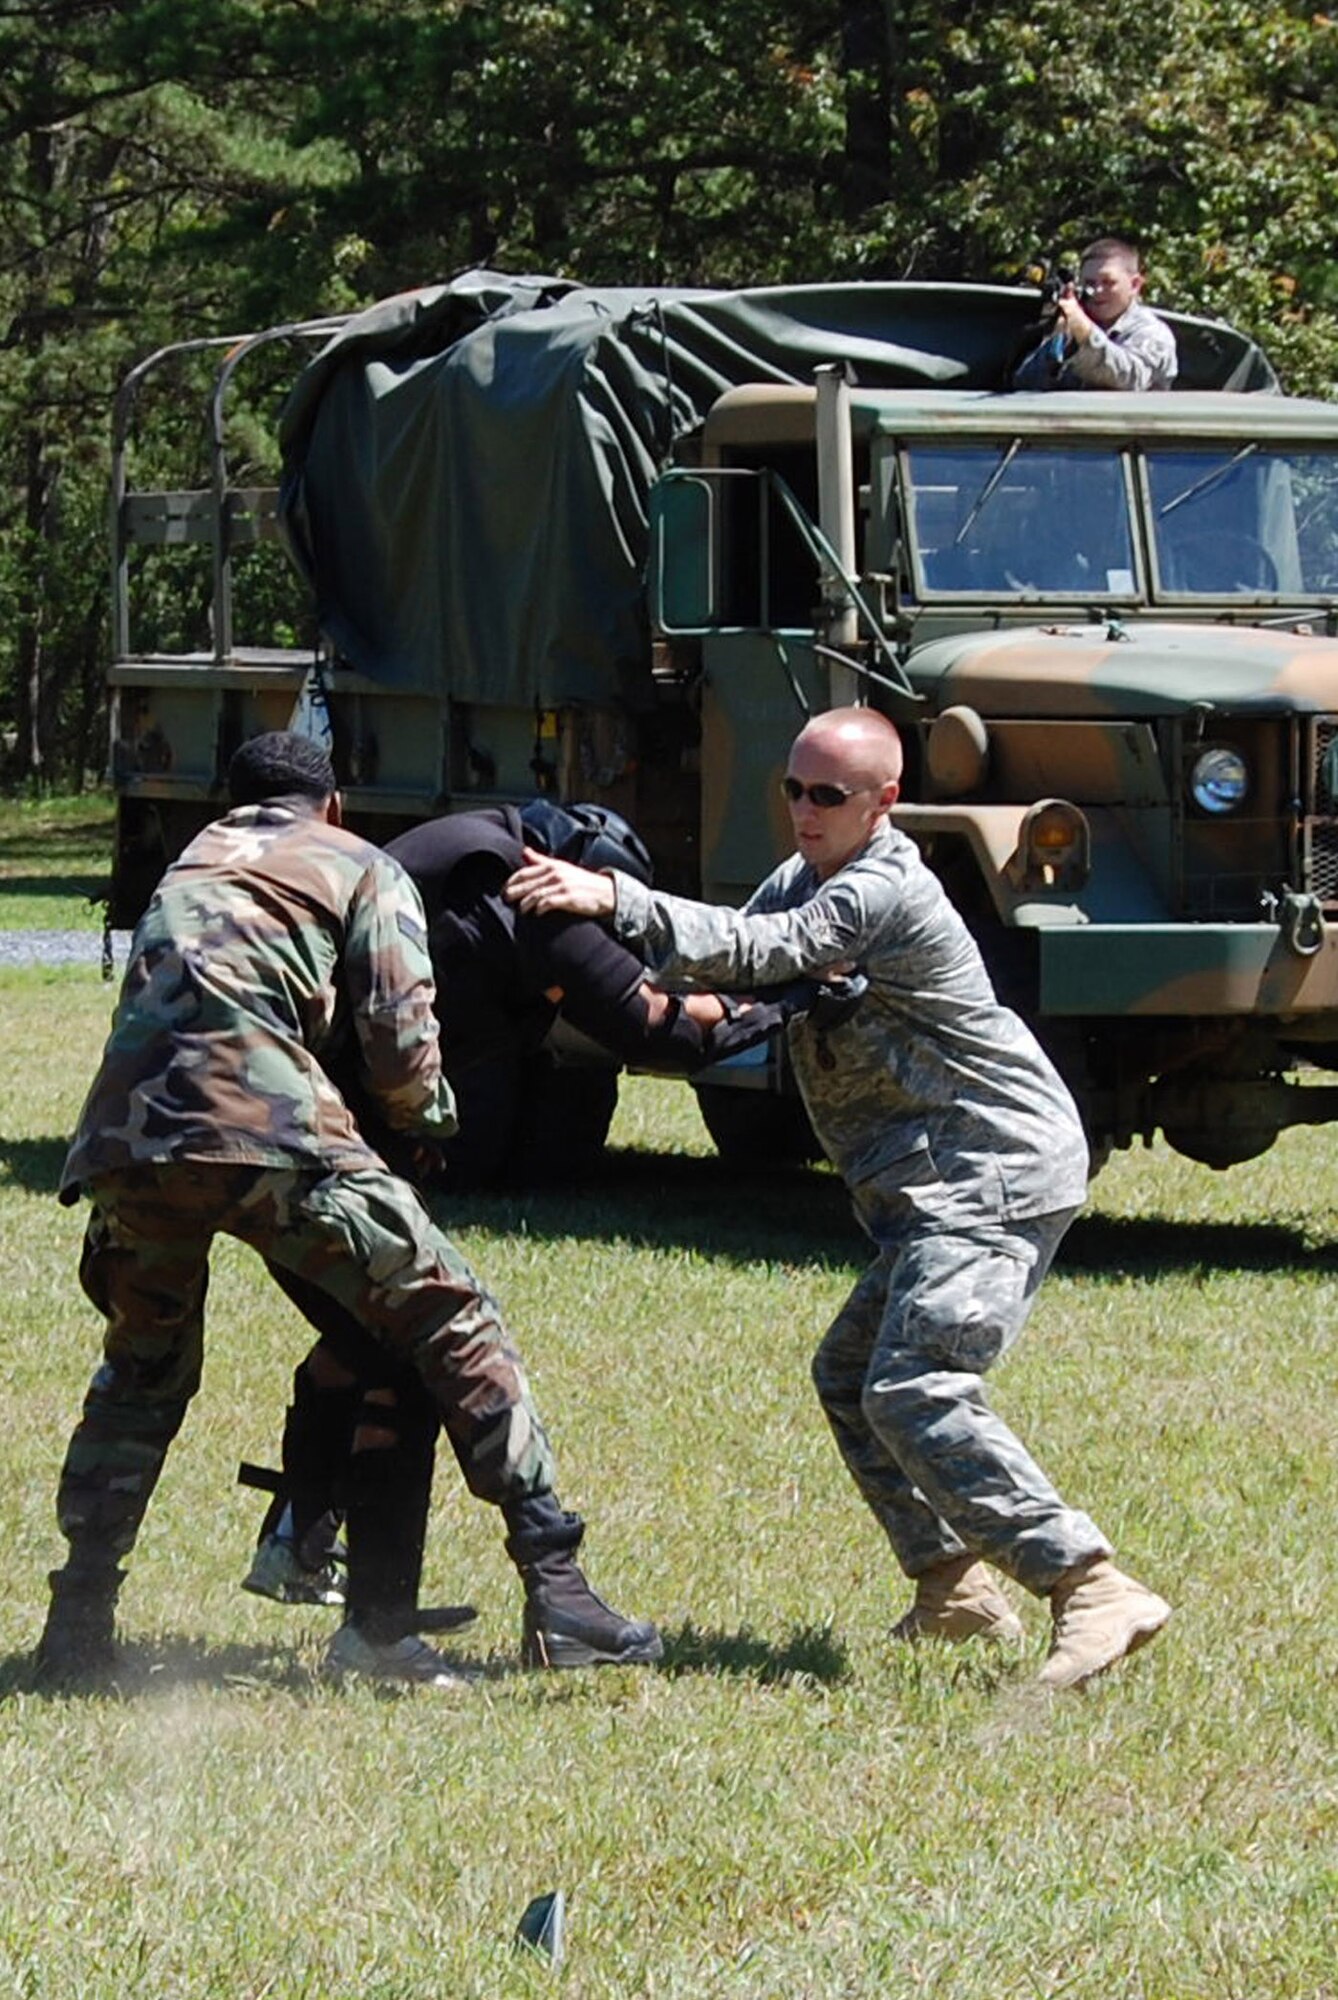 Students in the U.S. Air Force Expeditionary Center's Phoenix Raven Training Course battle an "agressor" during an evaluation session for the Raven course on a Fort Dix, N.J., range Aug. 20, 2008.  Raven training is taught by the Center's 421st Combat Training Squadron at Fort Dix.  It gives security forces Airmen specialized training in aircraft security, verbal judo and self defense.  (U.S. Air Force Photo/Tech. Sgt. Scott T. Sturkol)